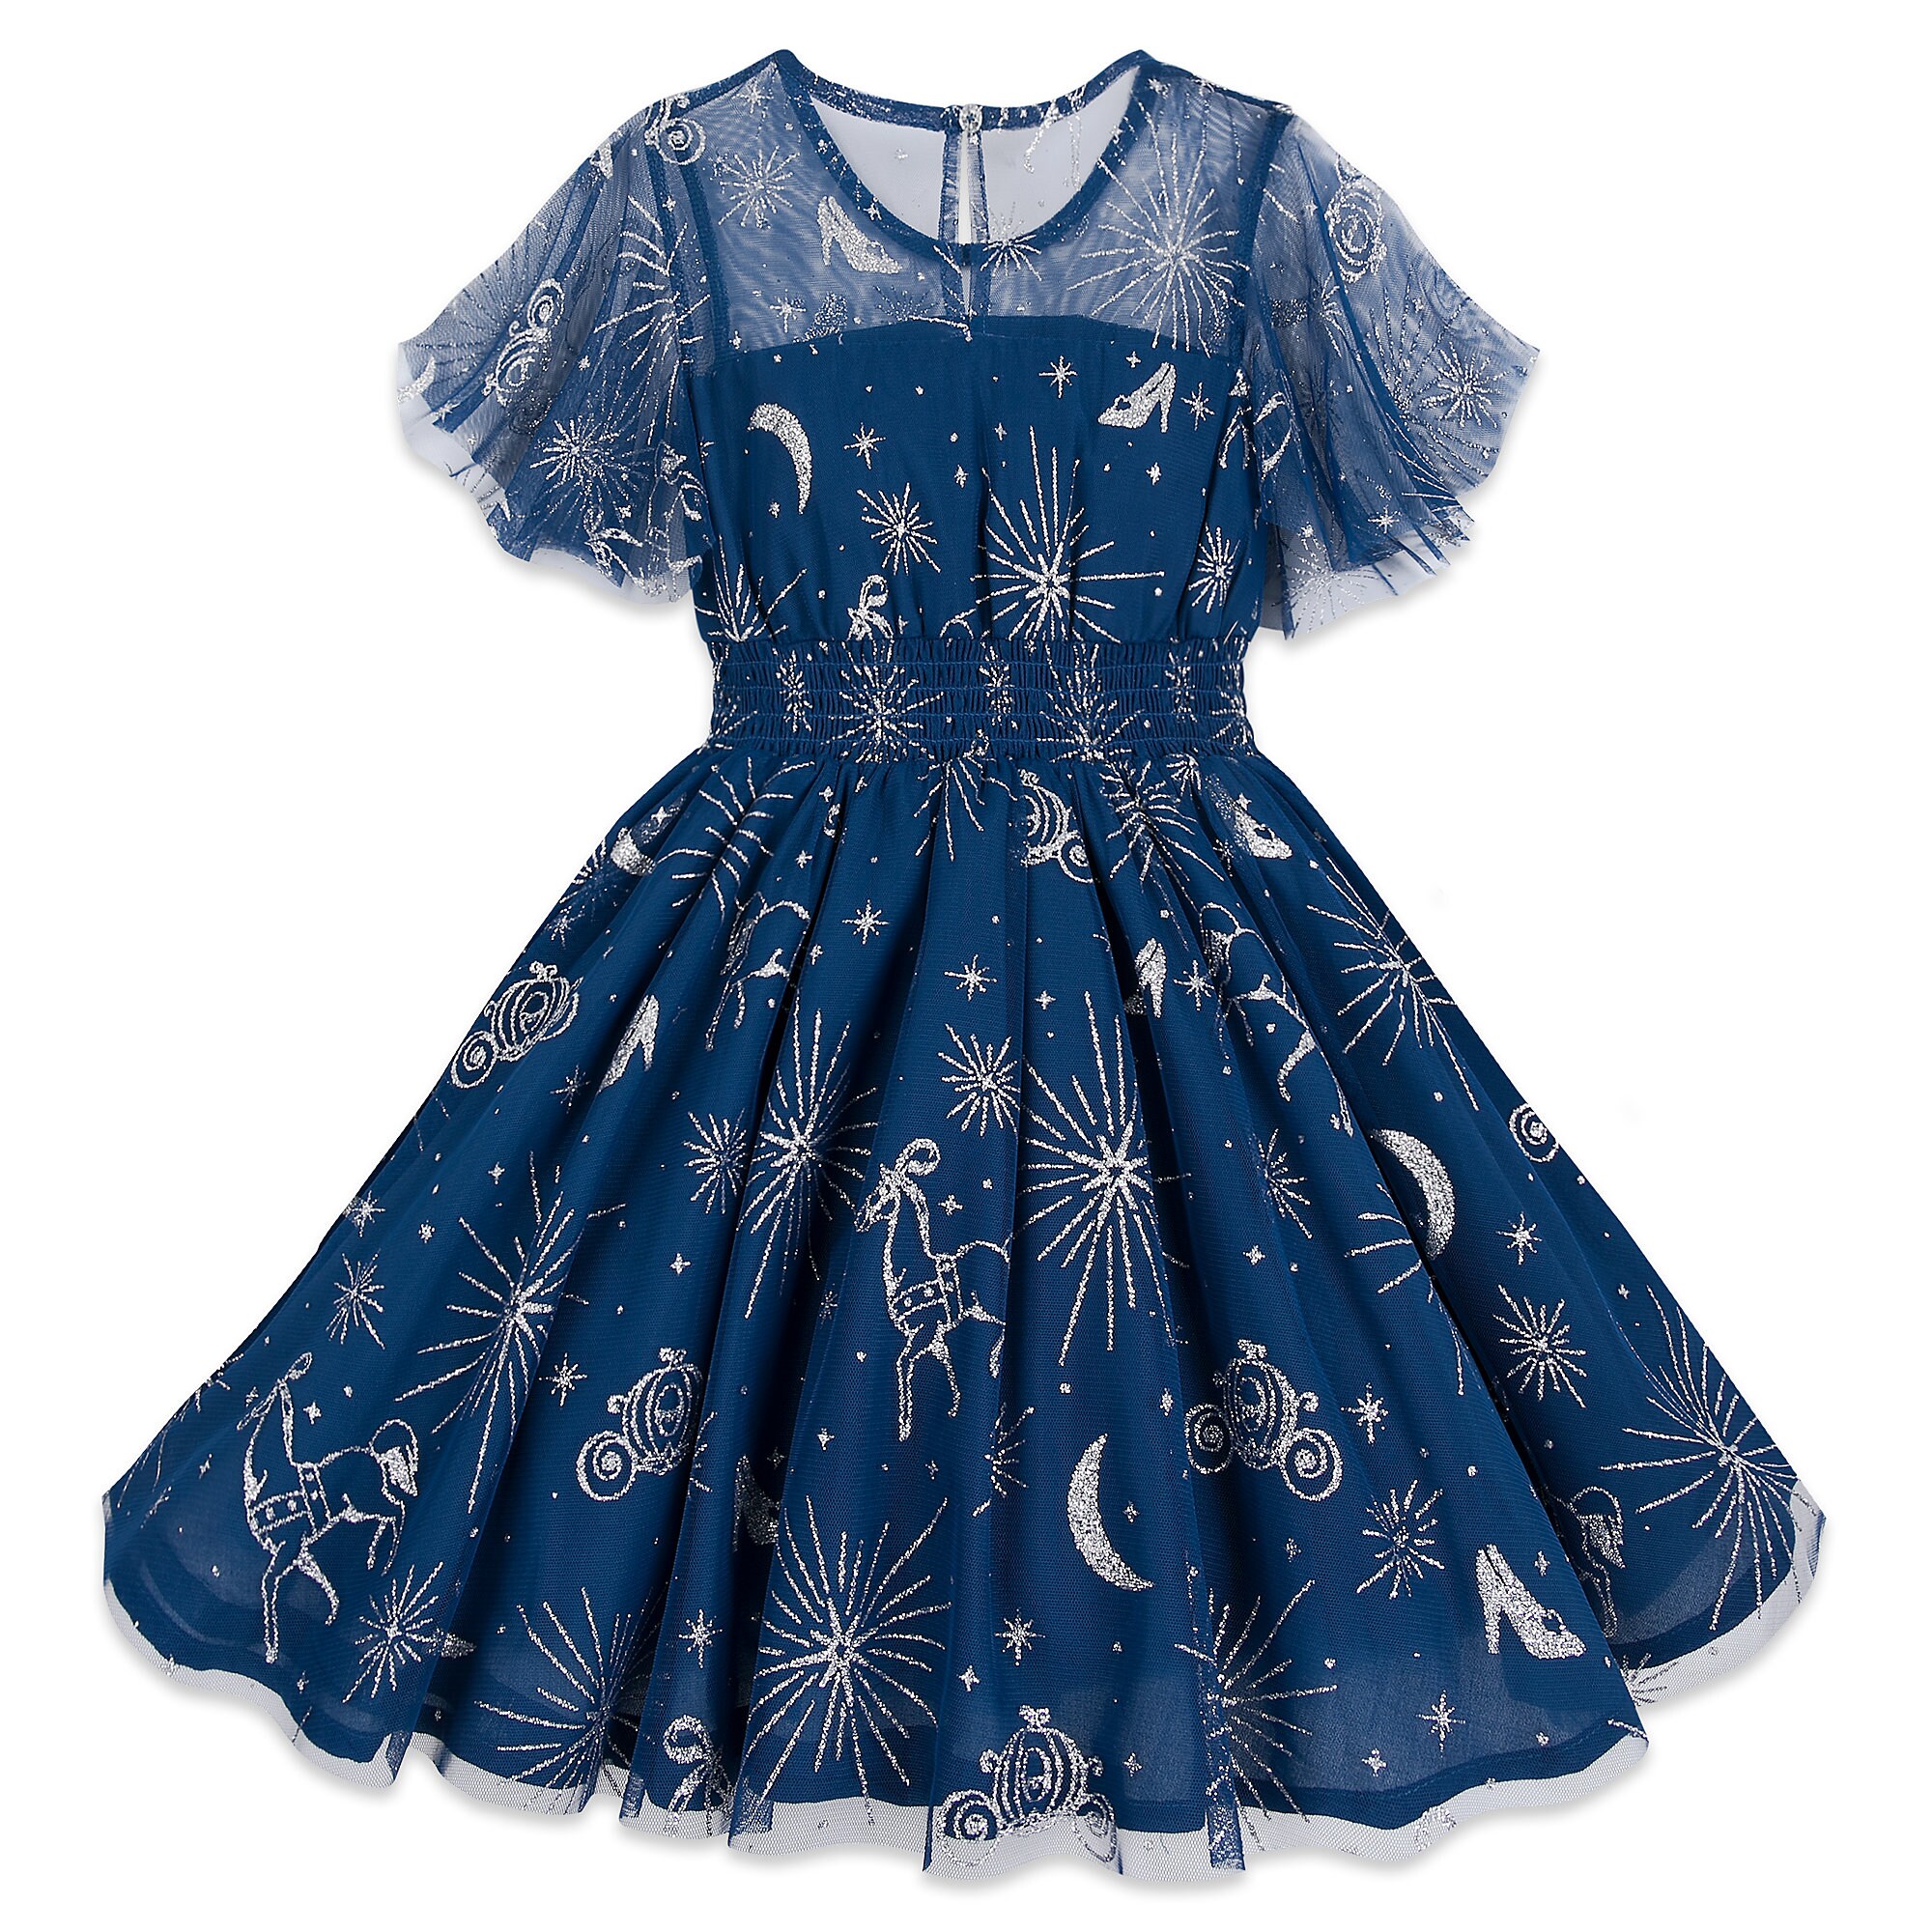 Cinderella Party Dress for Girls